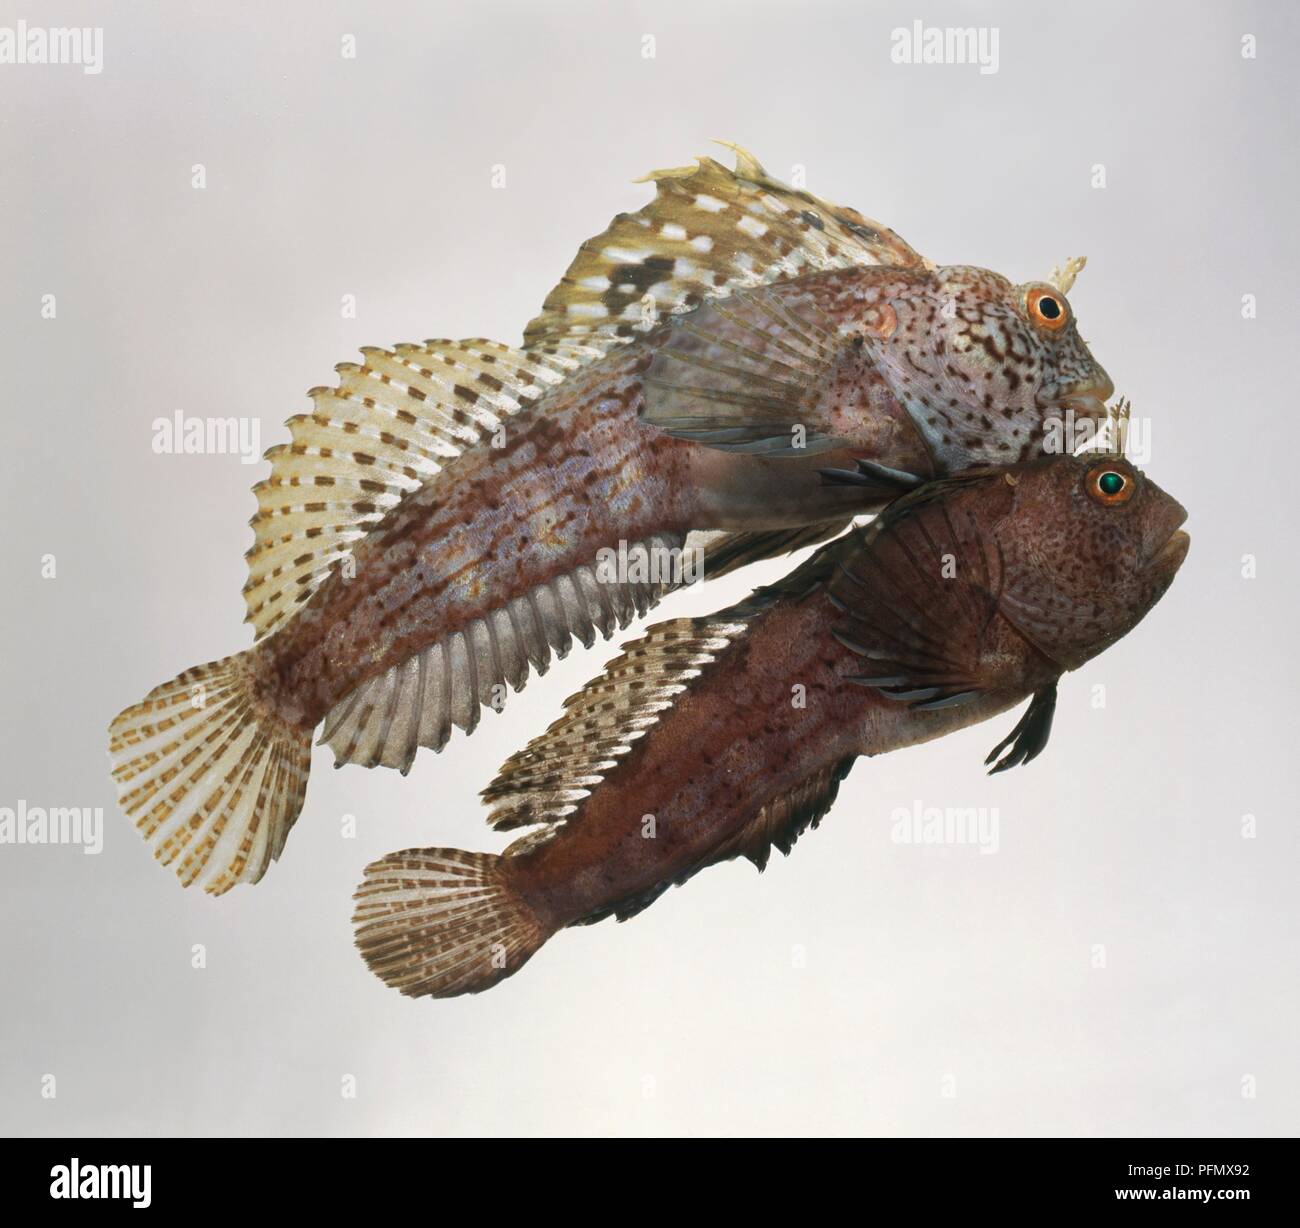 Butterfly blenny (Blennius ocellaris) and Tompot blenny (Parablennius gattorugine) swimming together Stock Photo